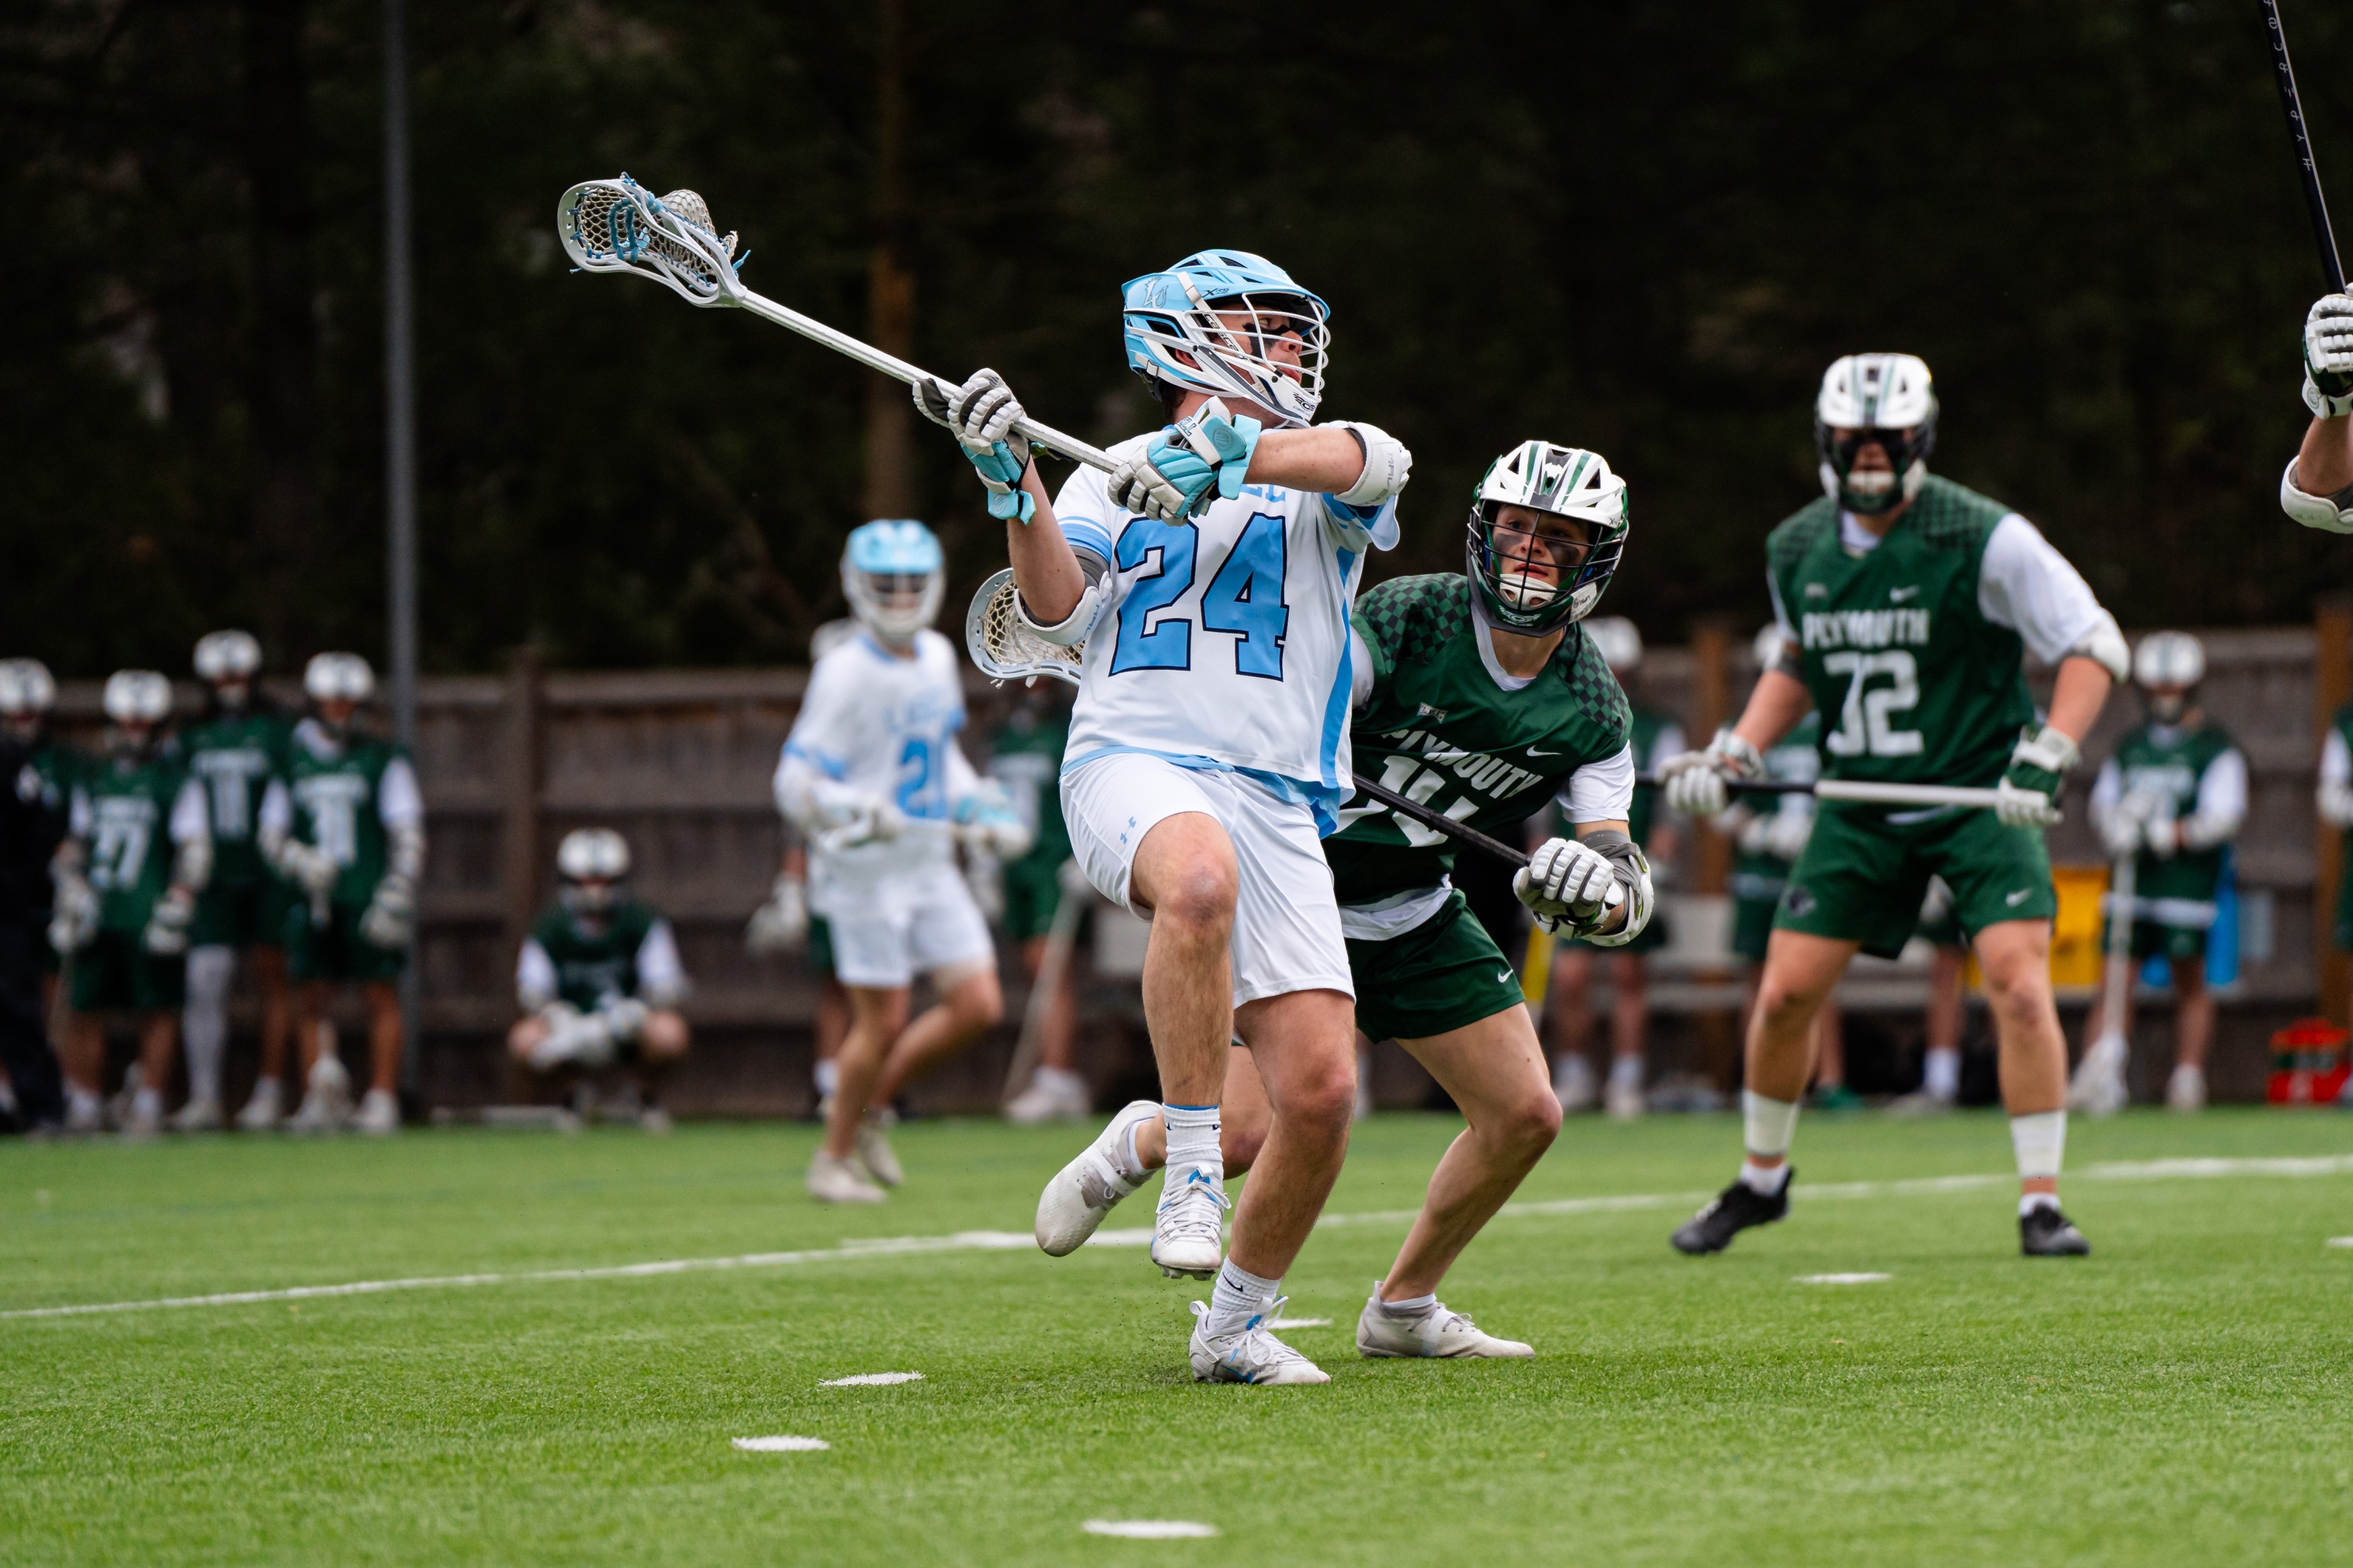 MLax: Lasers Head to Semi-Finals with 15-6 Win Over Norwich